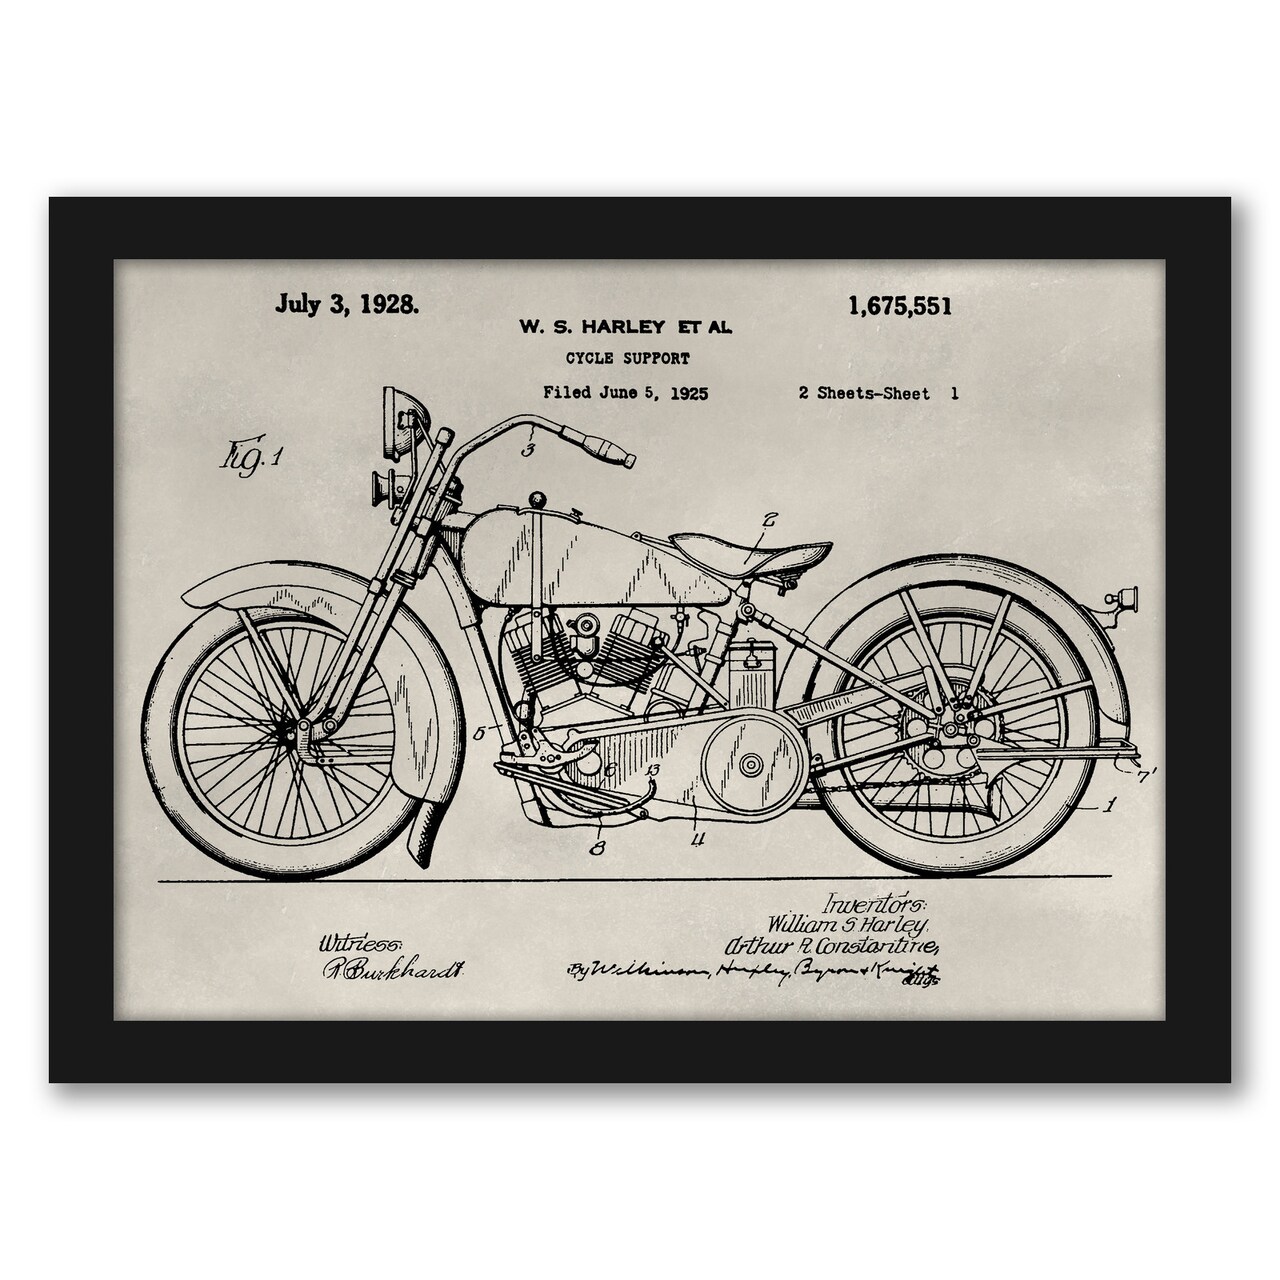 Patent--Motorcycle By Alicia Ludwig by World Art Group Frame  - Americanflat